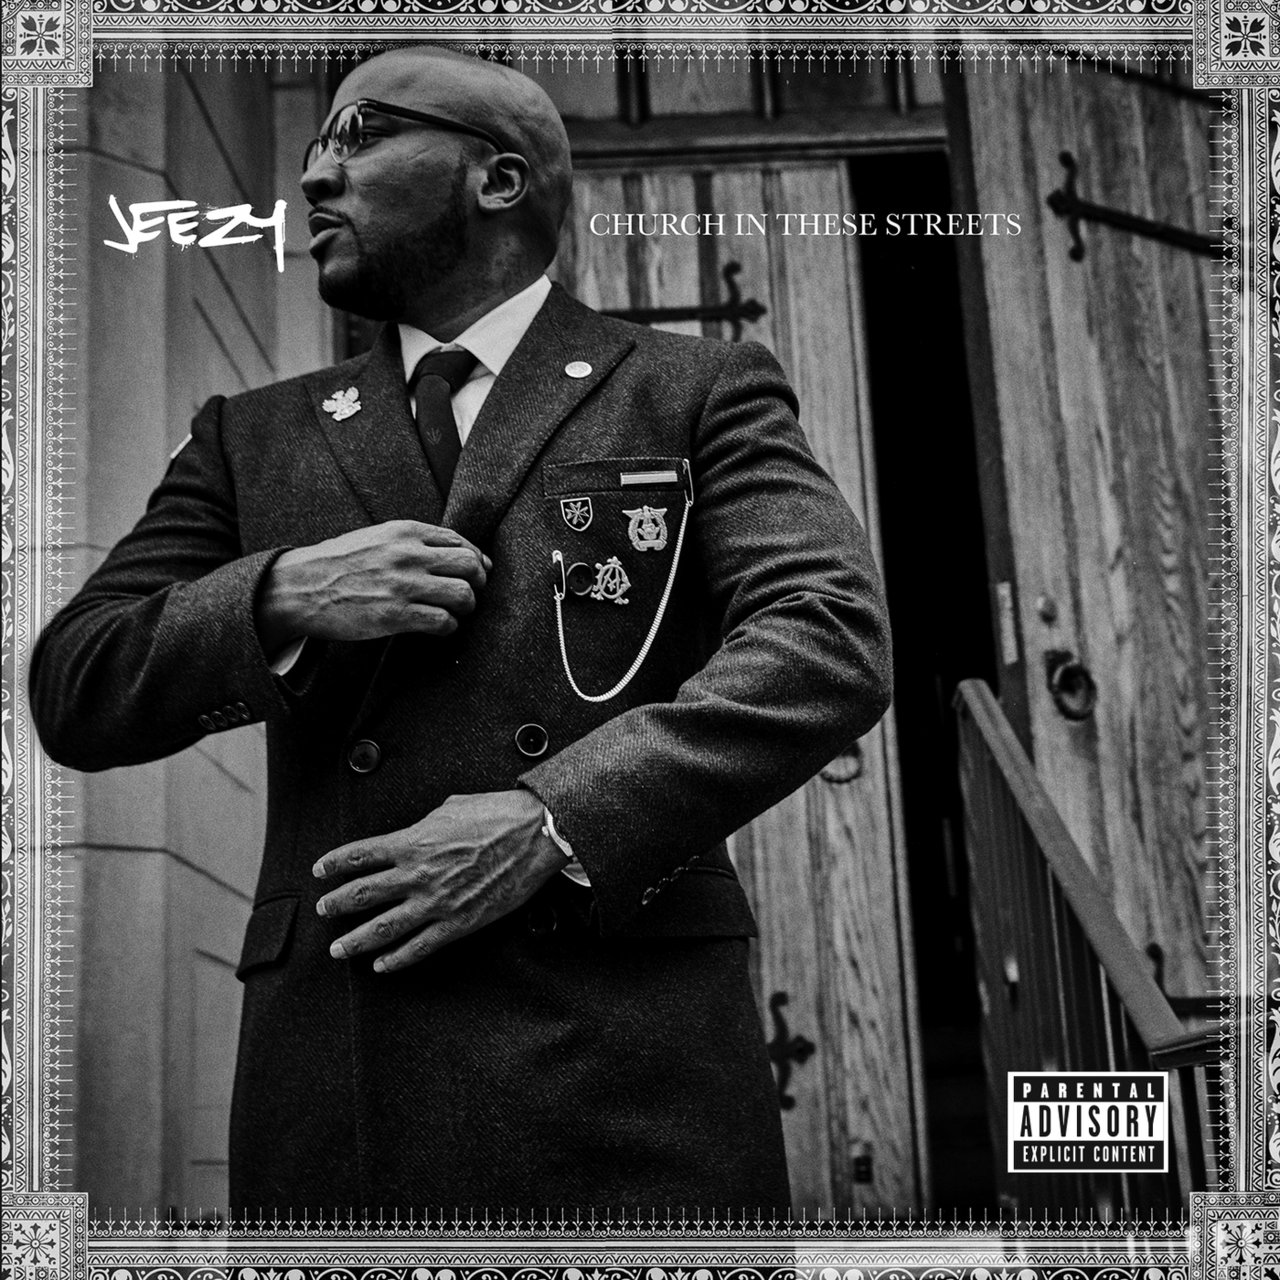 Jeezy - Church In These Streets (Cover)